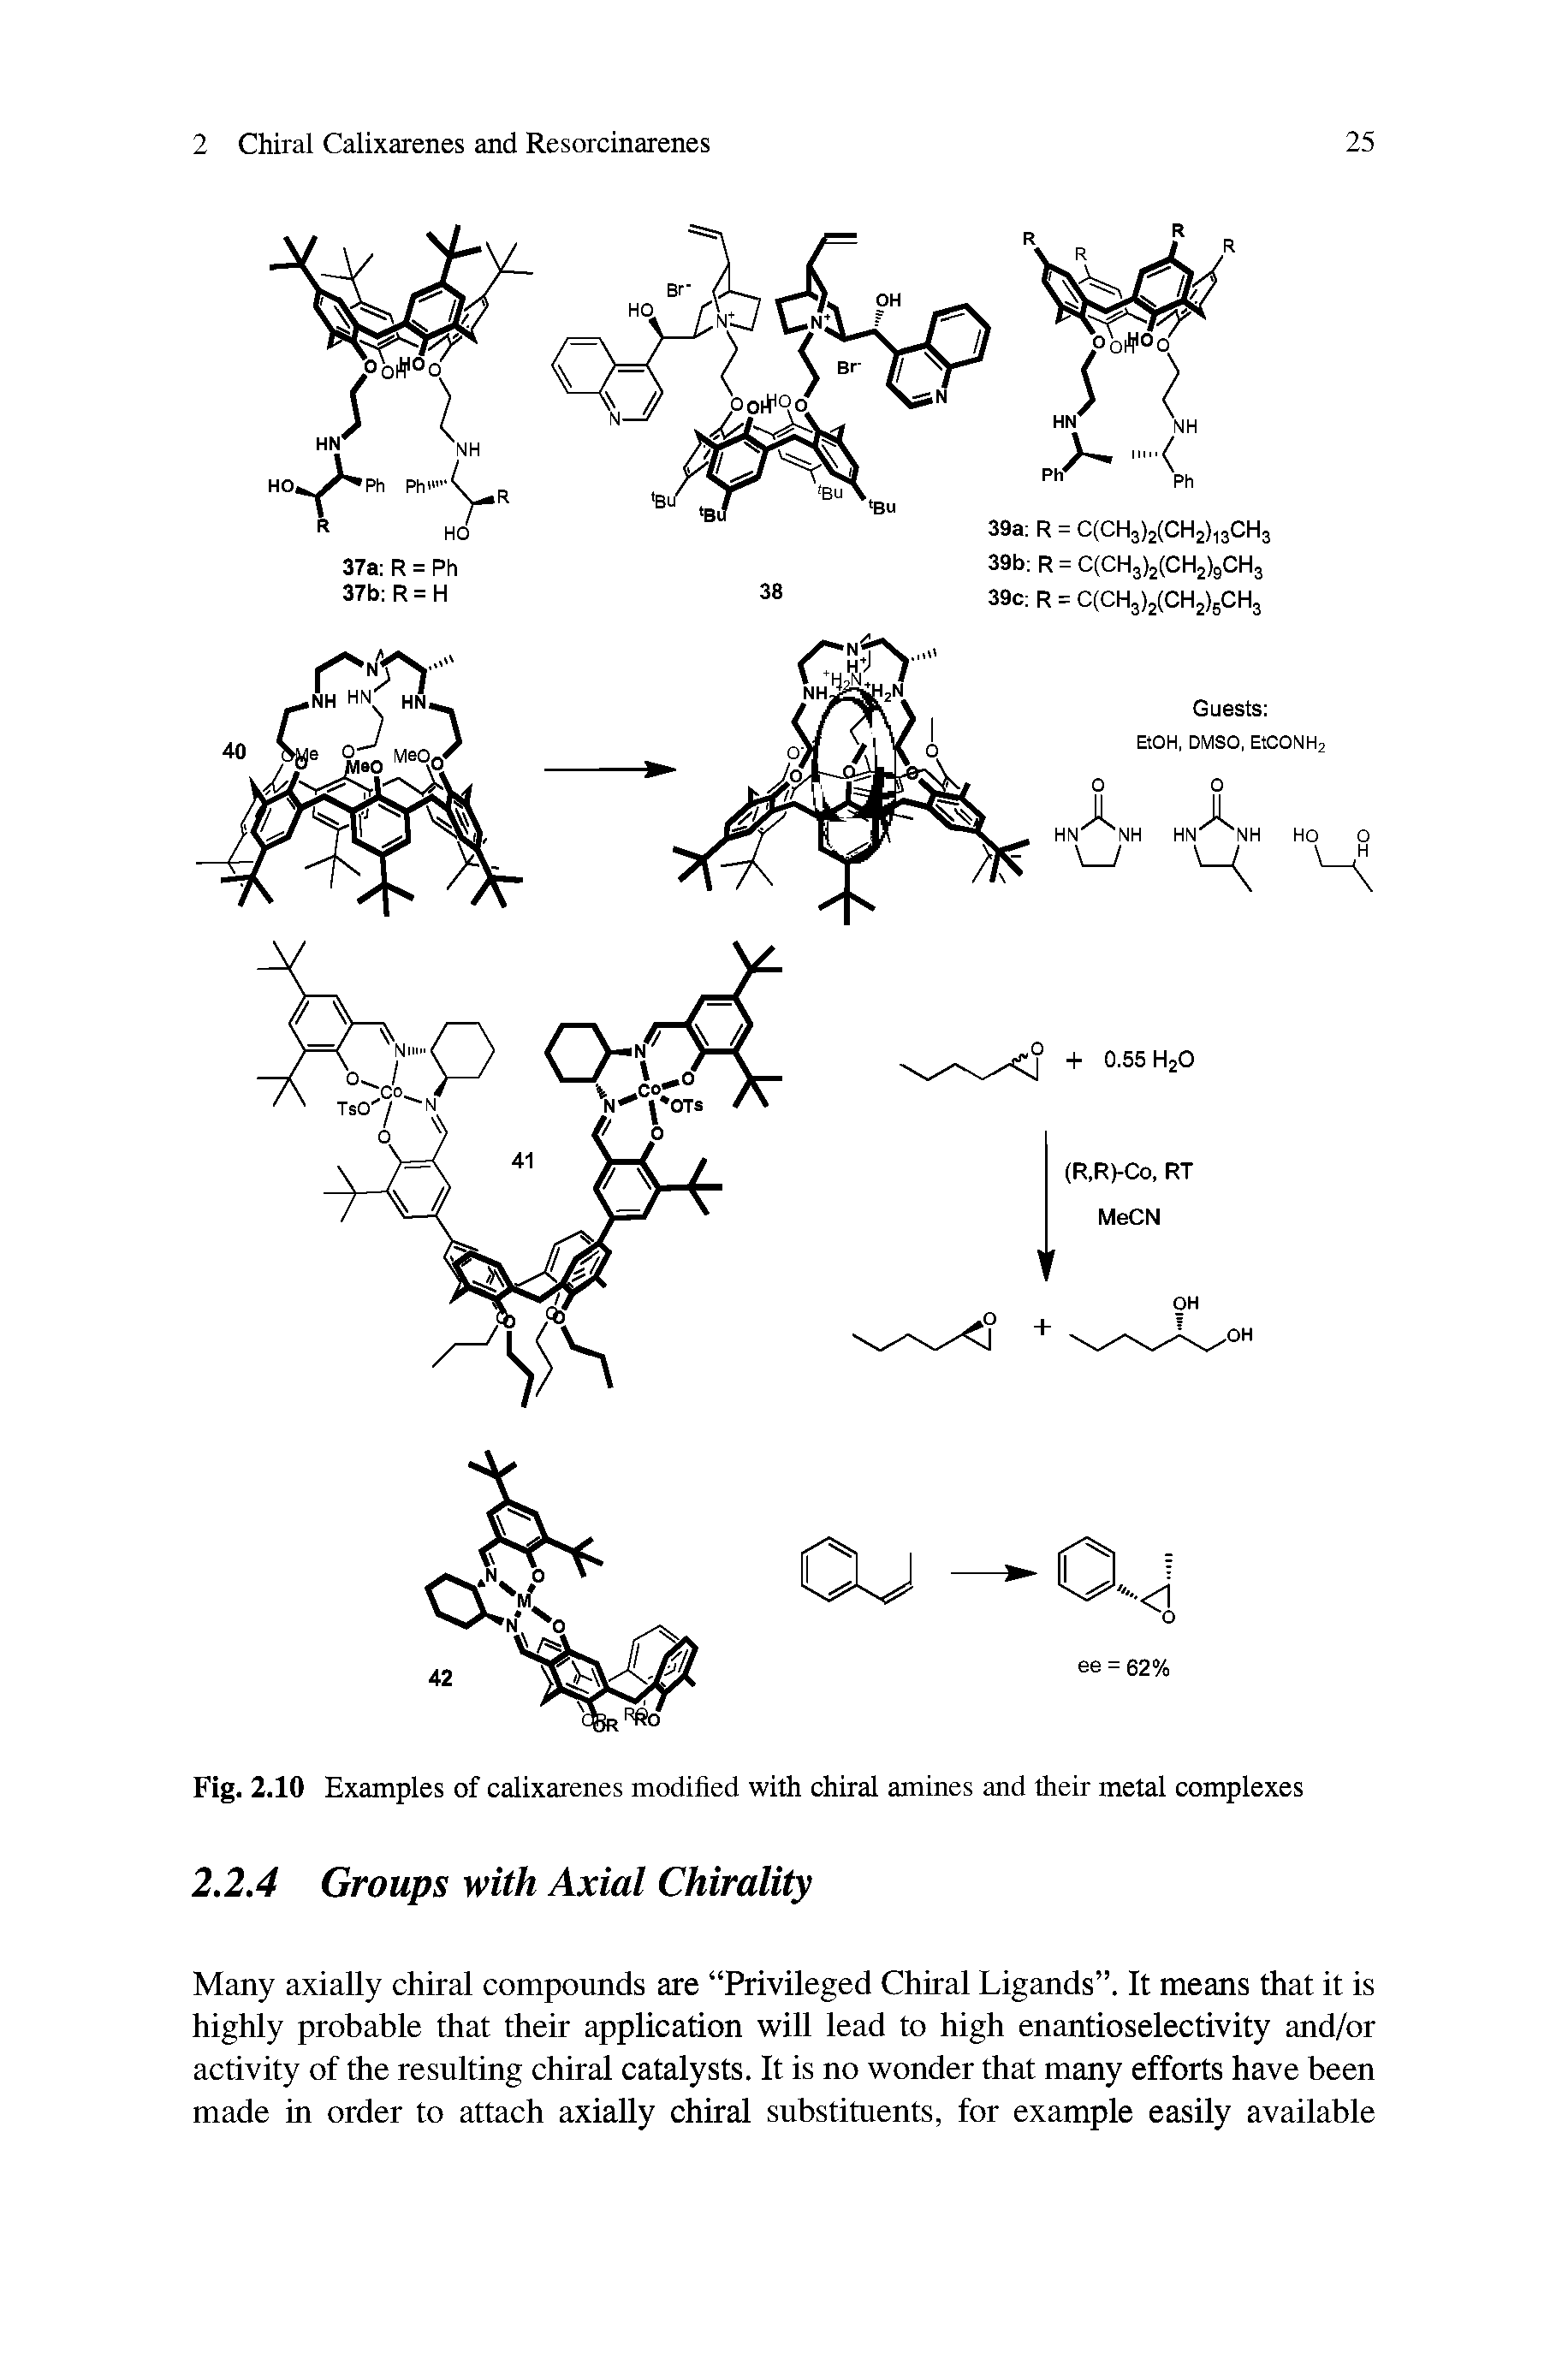 Fig. 2.10 Examples of calixarenes modified with chiral amines and their metal complexes...